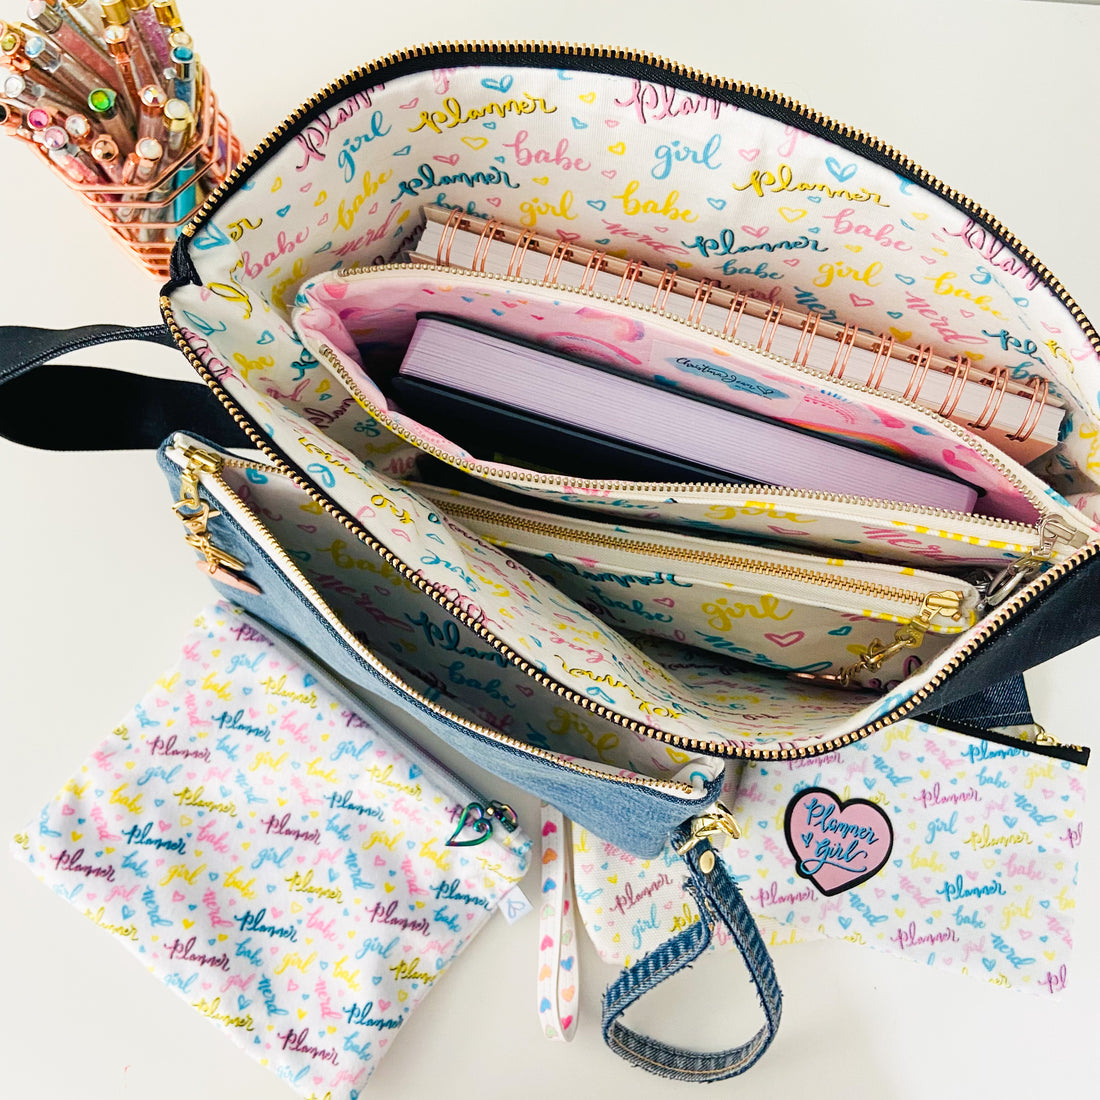 Planner Love Collection - Bags for all your Planner Supplies